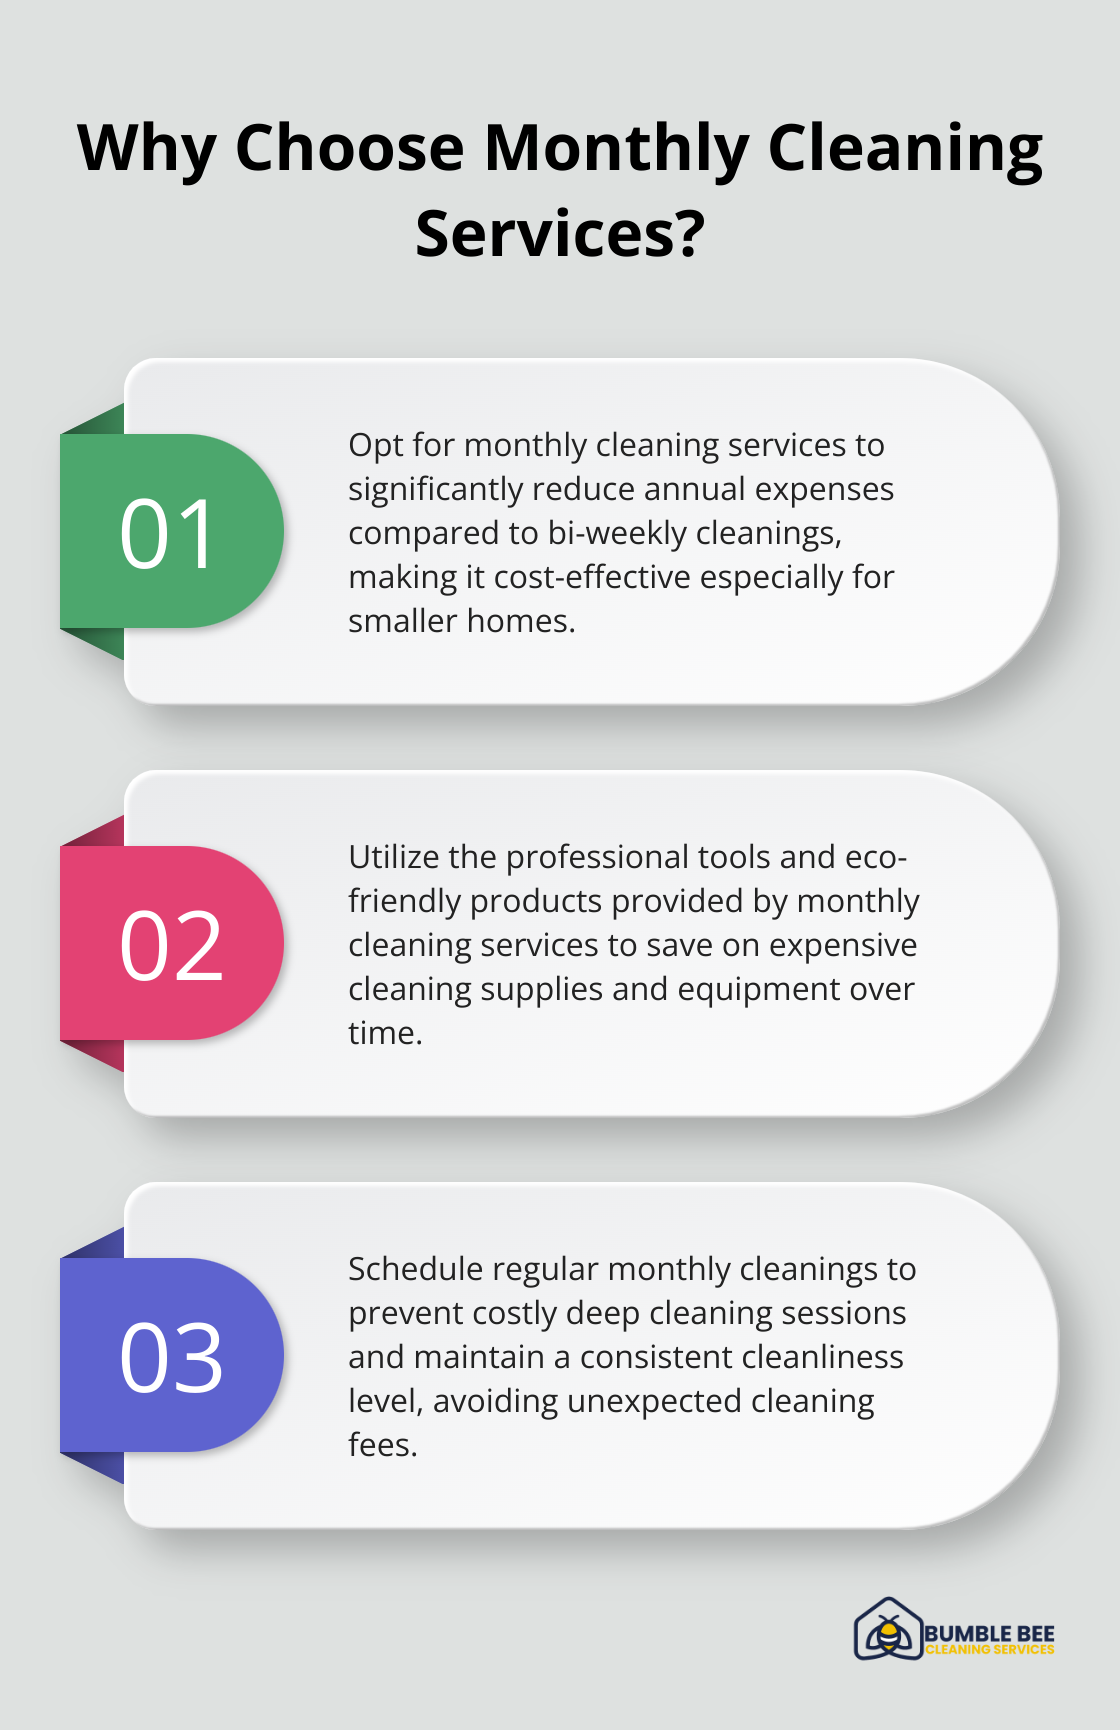 Fact - Why Choose Monthly Cleaning Services?